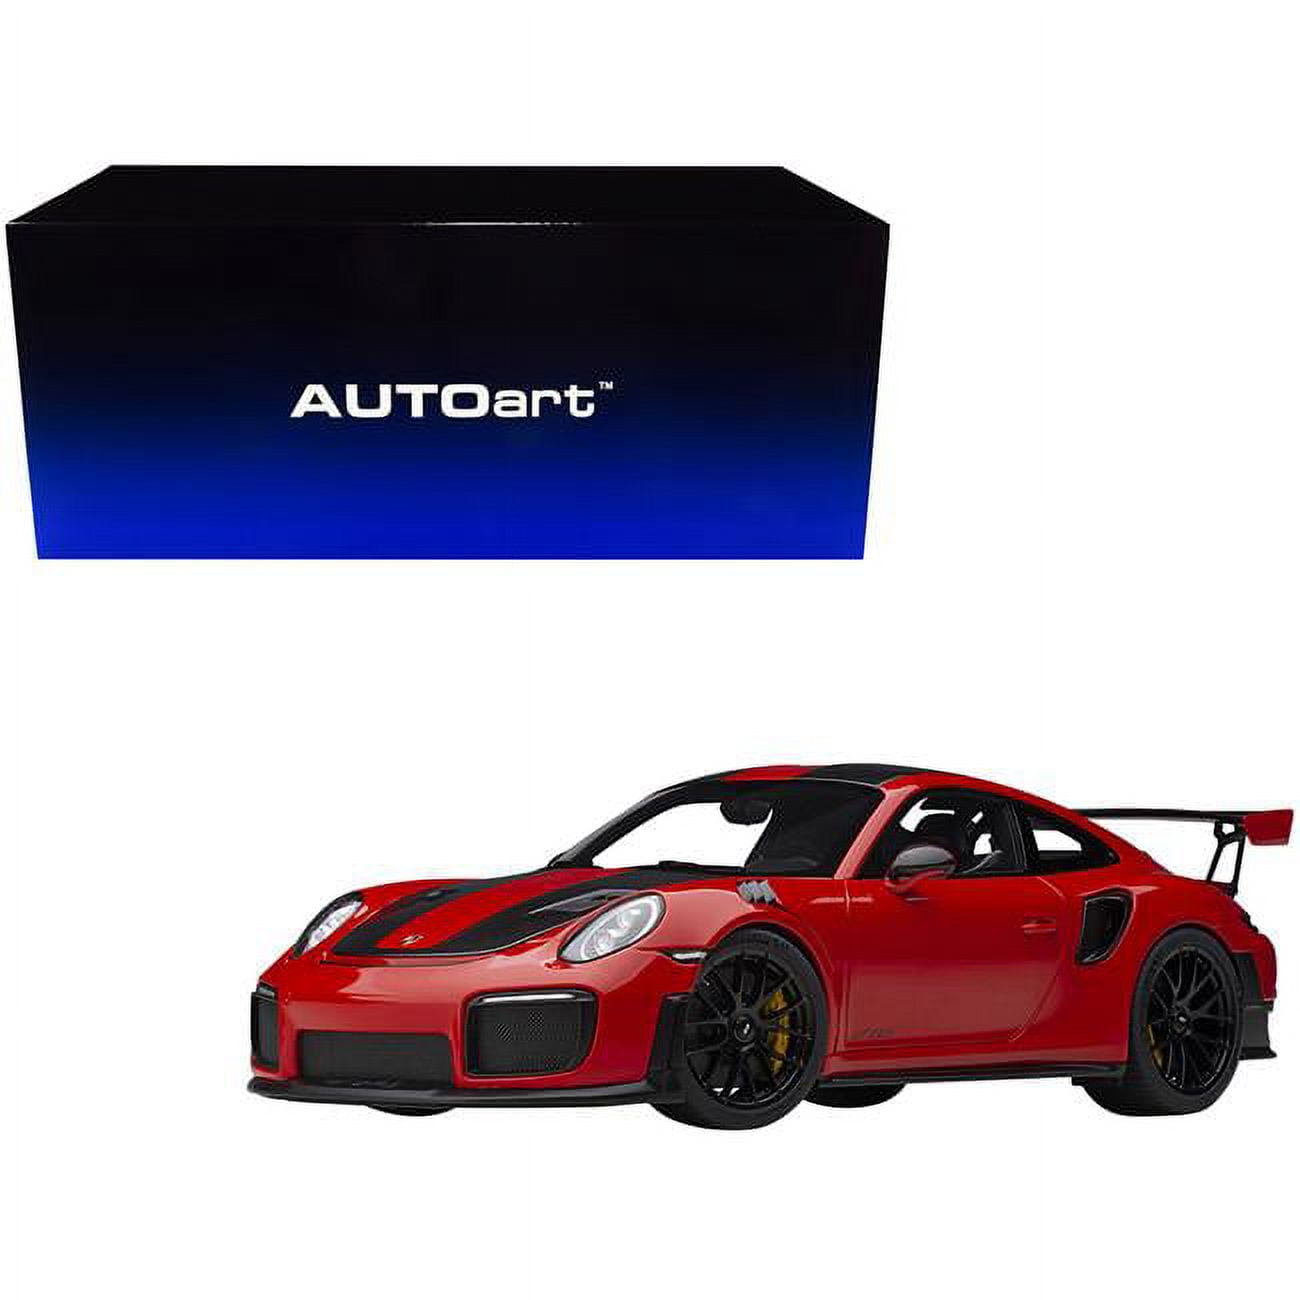 Picture of Autoart 78173 1-18 Scale Porsche 911 Gt2 Rs Weissach Guards with Carbon Stripe Model Car, Red